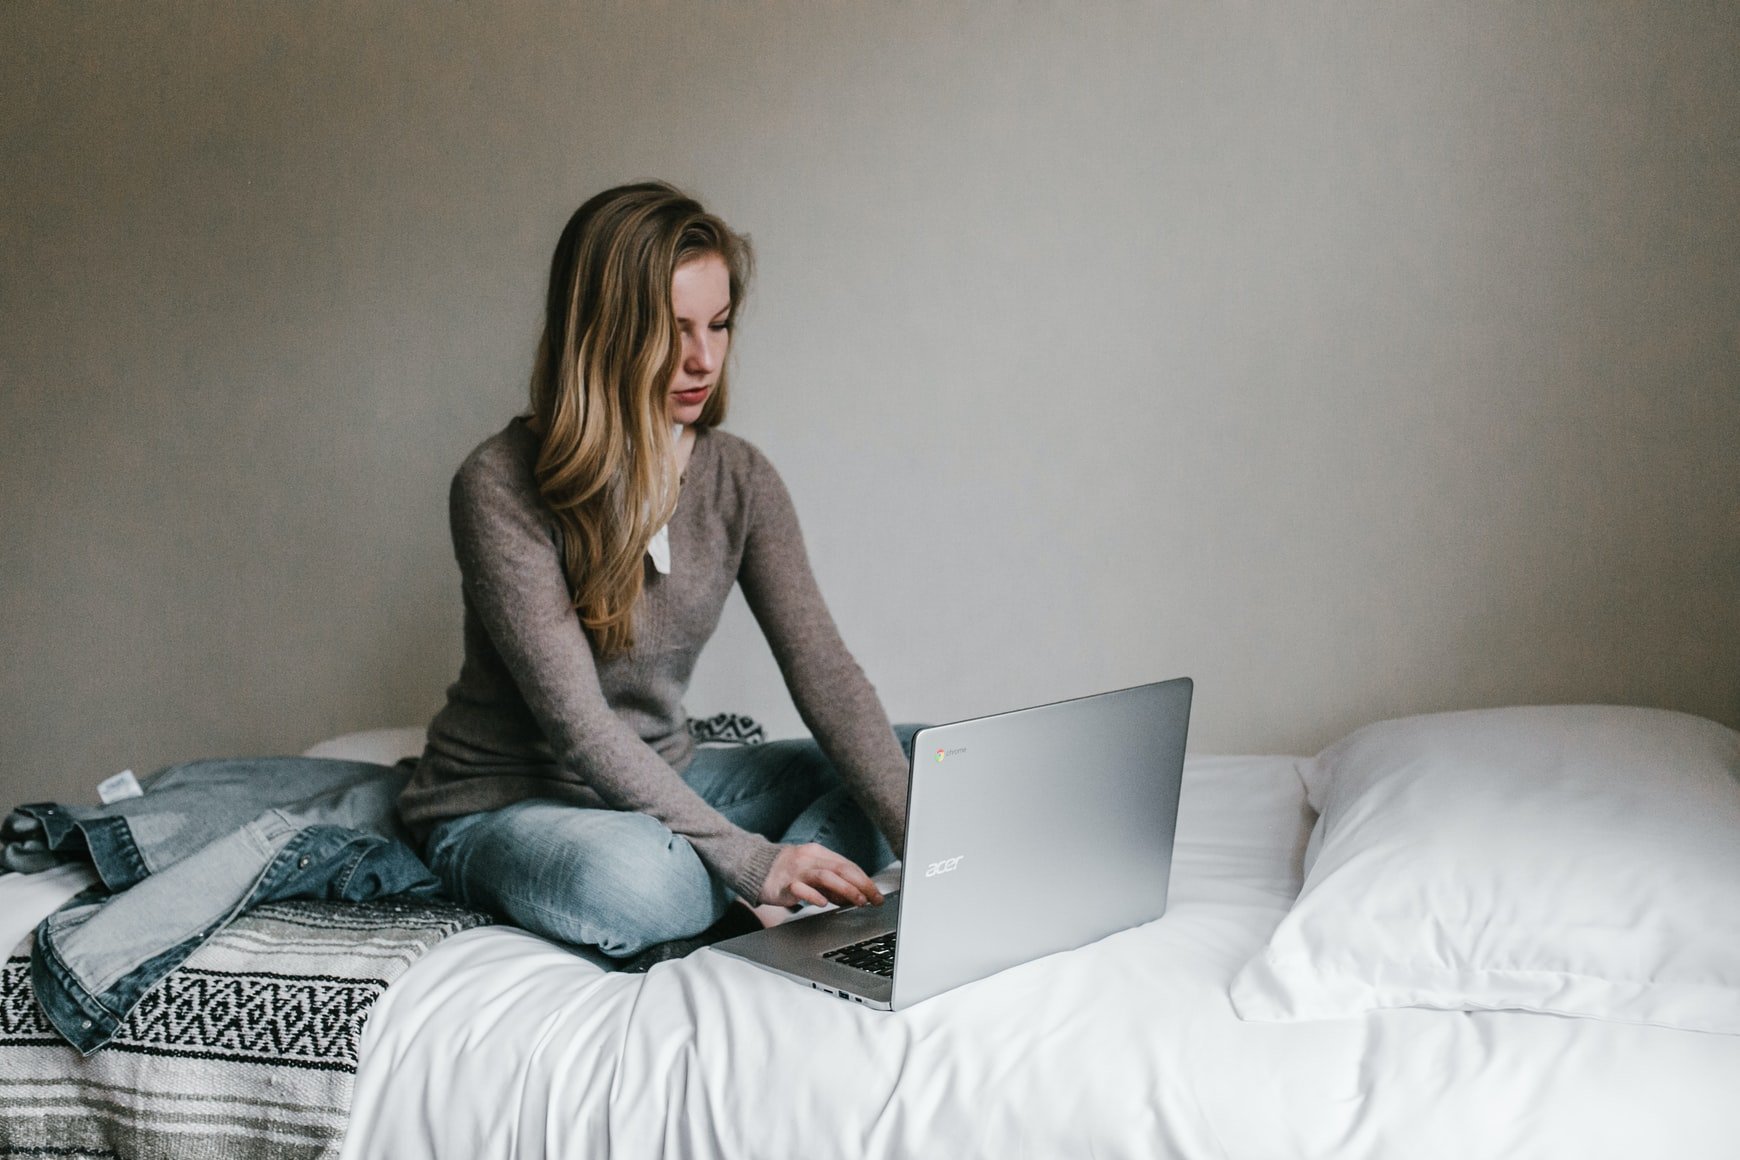 A woman using her laptop while sitting in bed. | Source: Unsplash